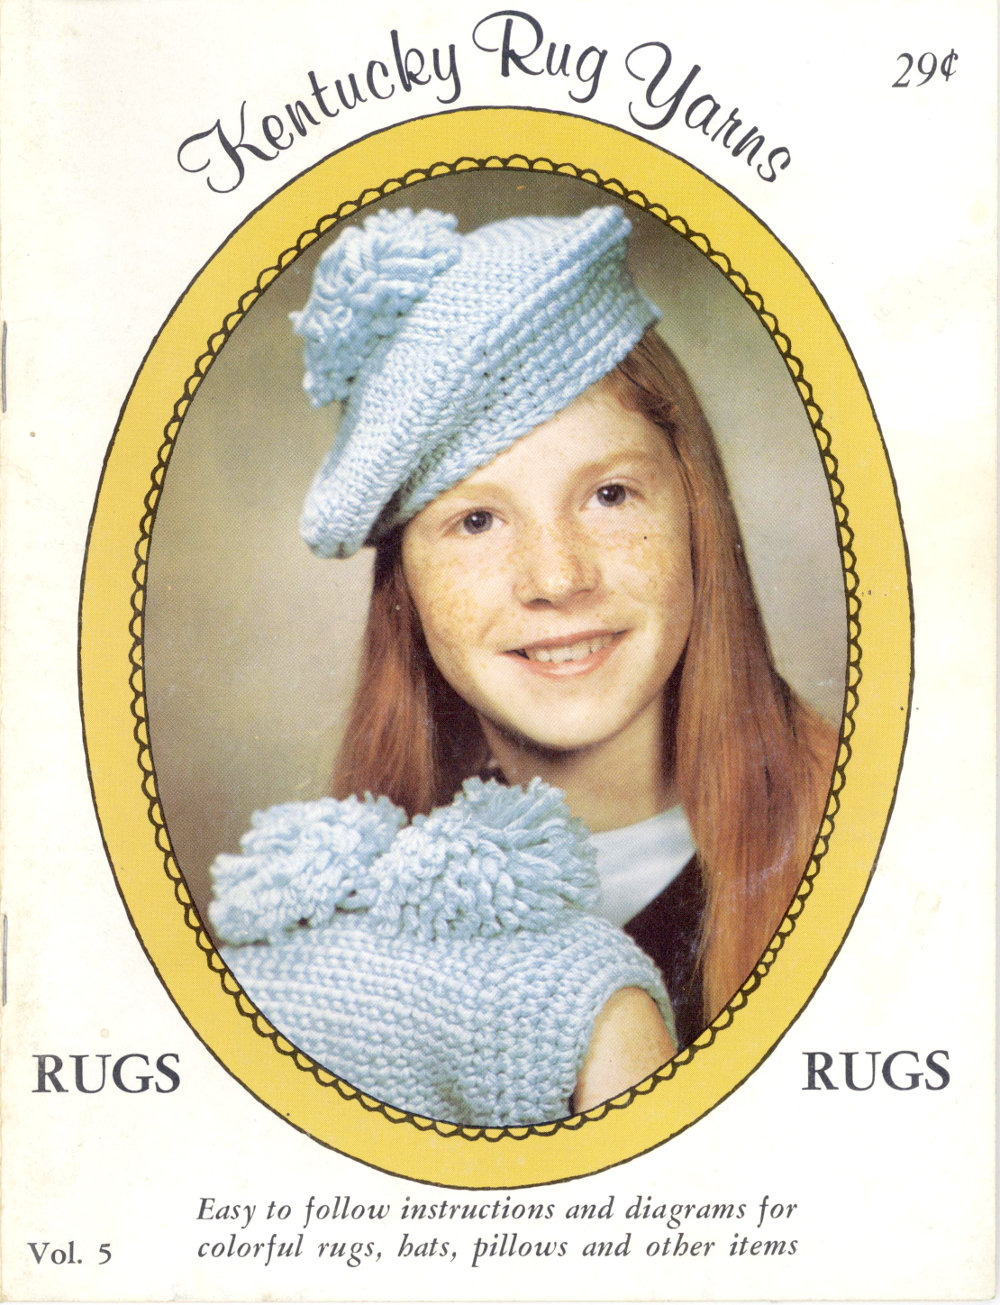 Kentucky Rug Yarns Vol. 5: Rugs&#10;Easy to follow instructions and diagrams for colorful rugs, hats, pillows and other items